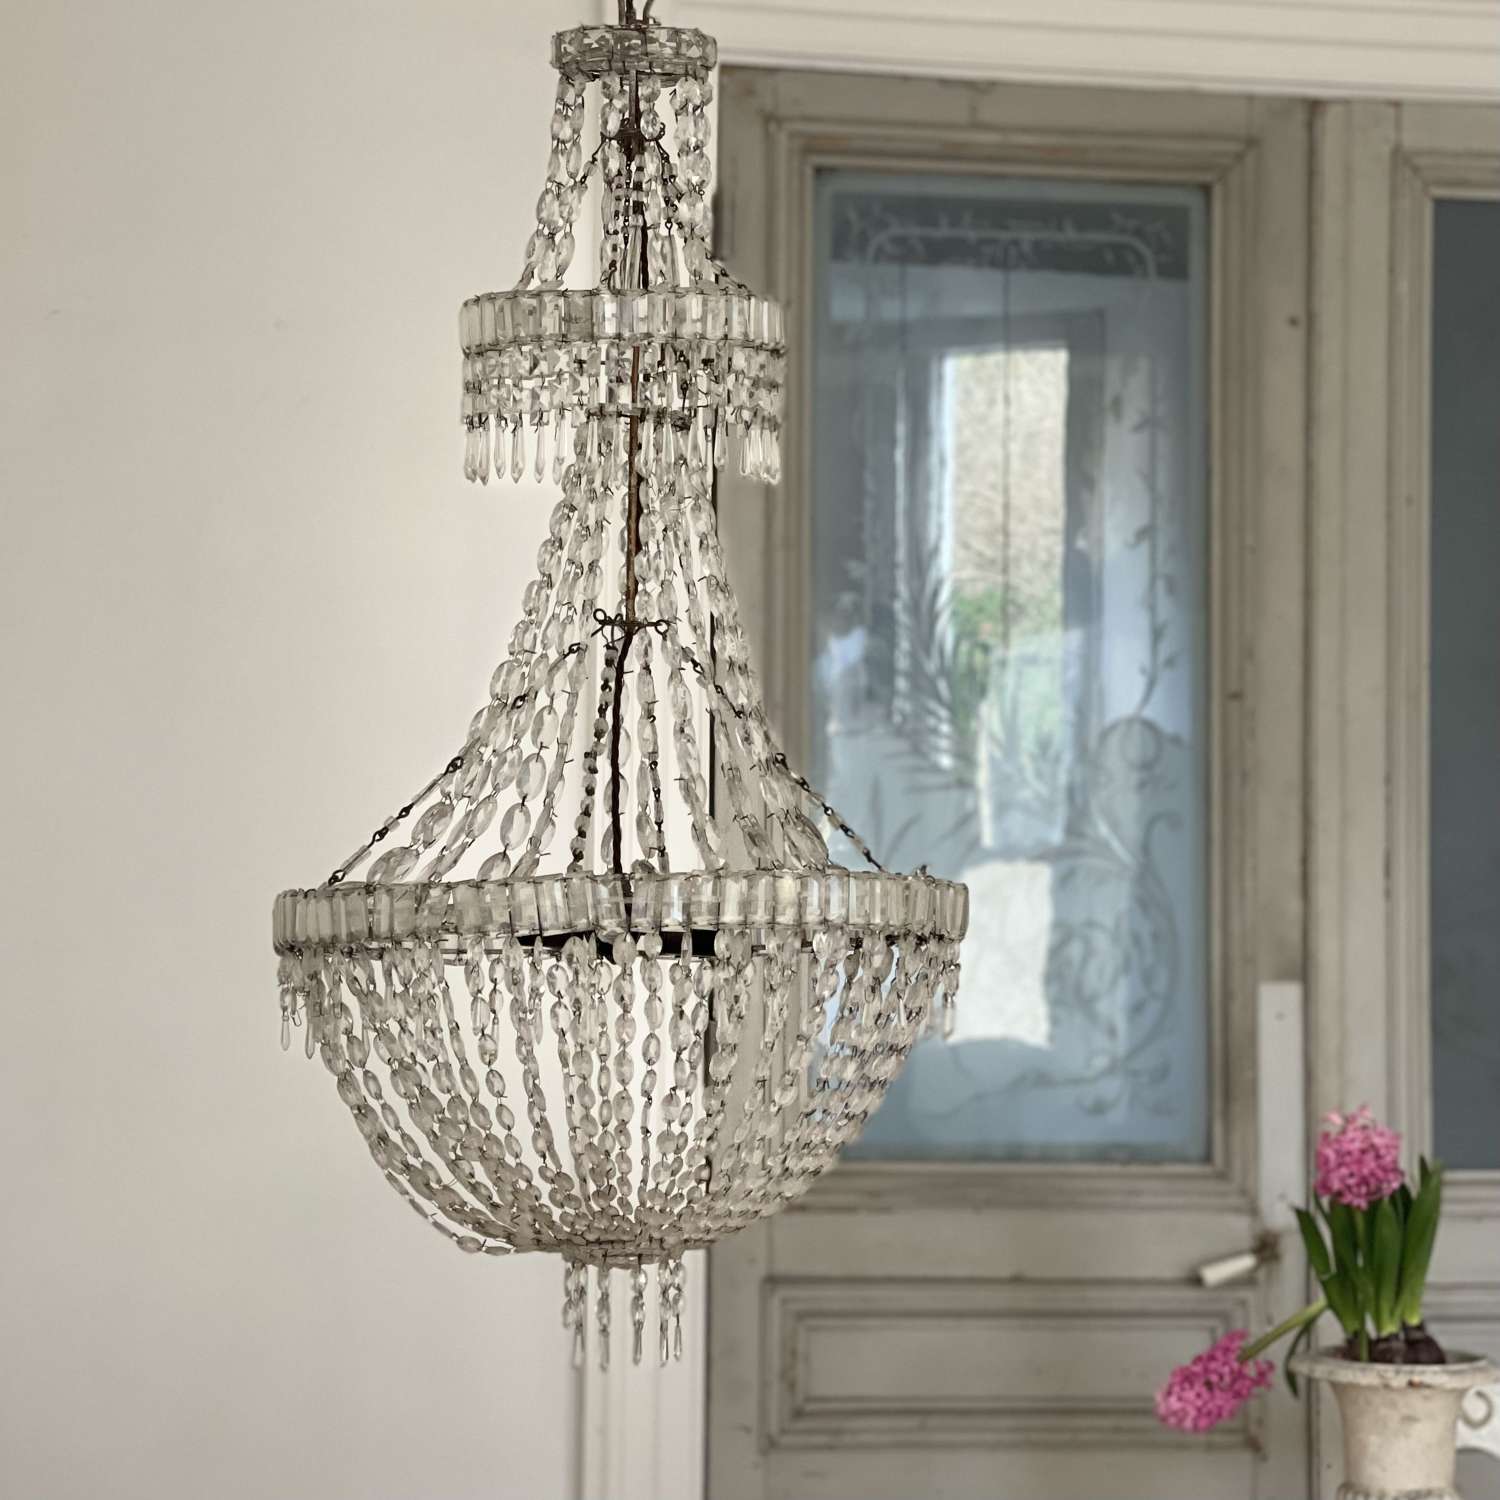 Large vintage French chandelier - rewired